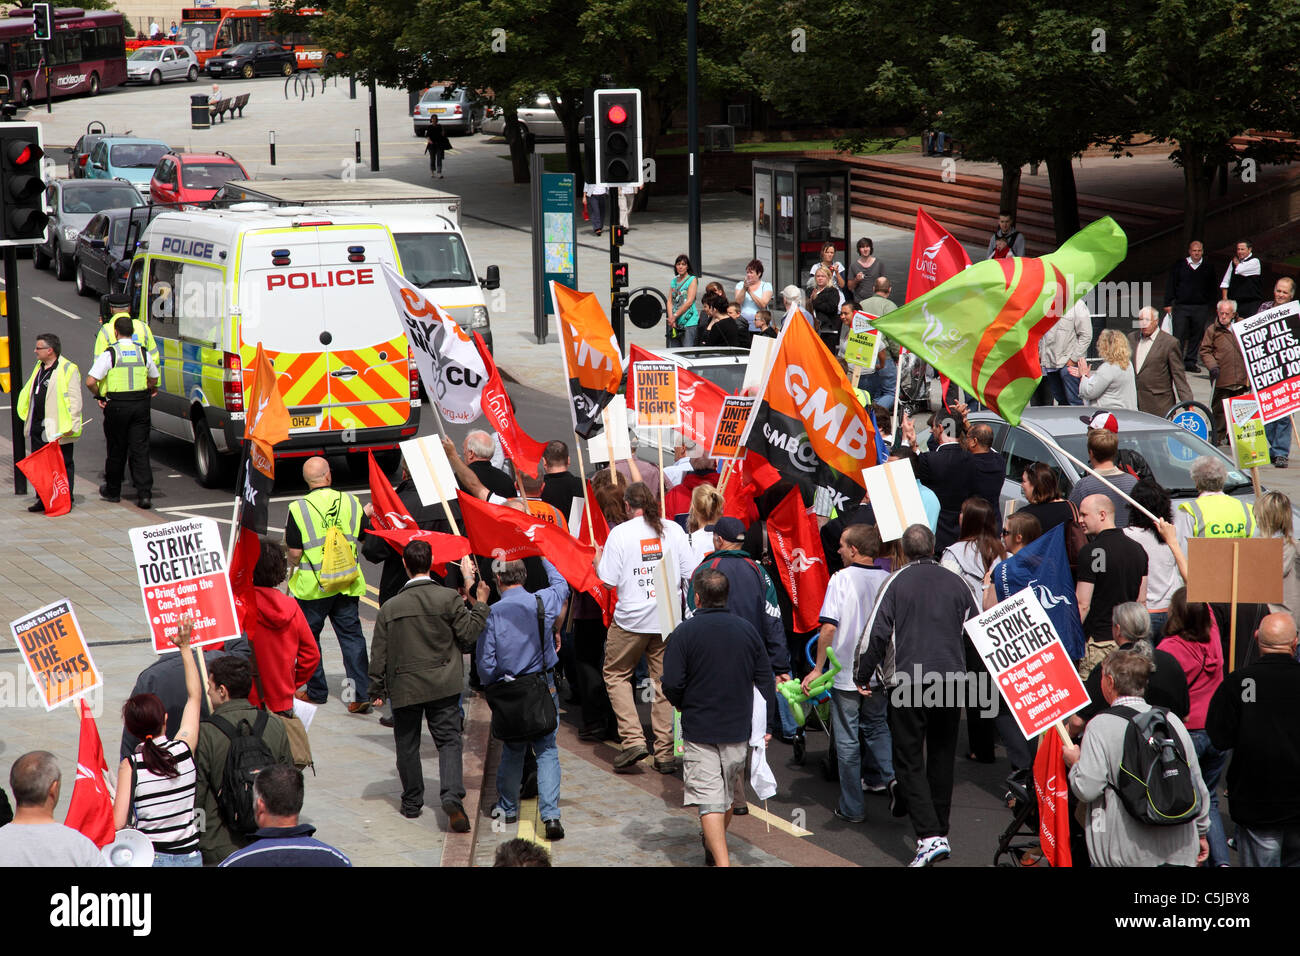 A demonstration in Derby supporting Derby based Bombardier after the Thames Link train building contract was awarded to Siemens. Stock Photo